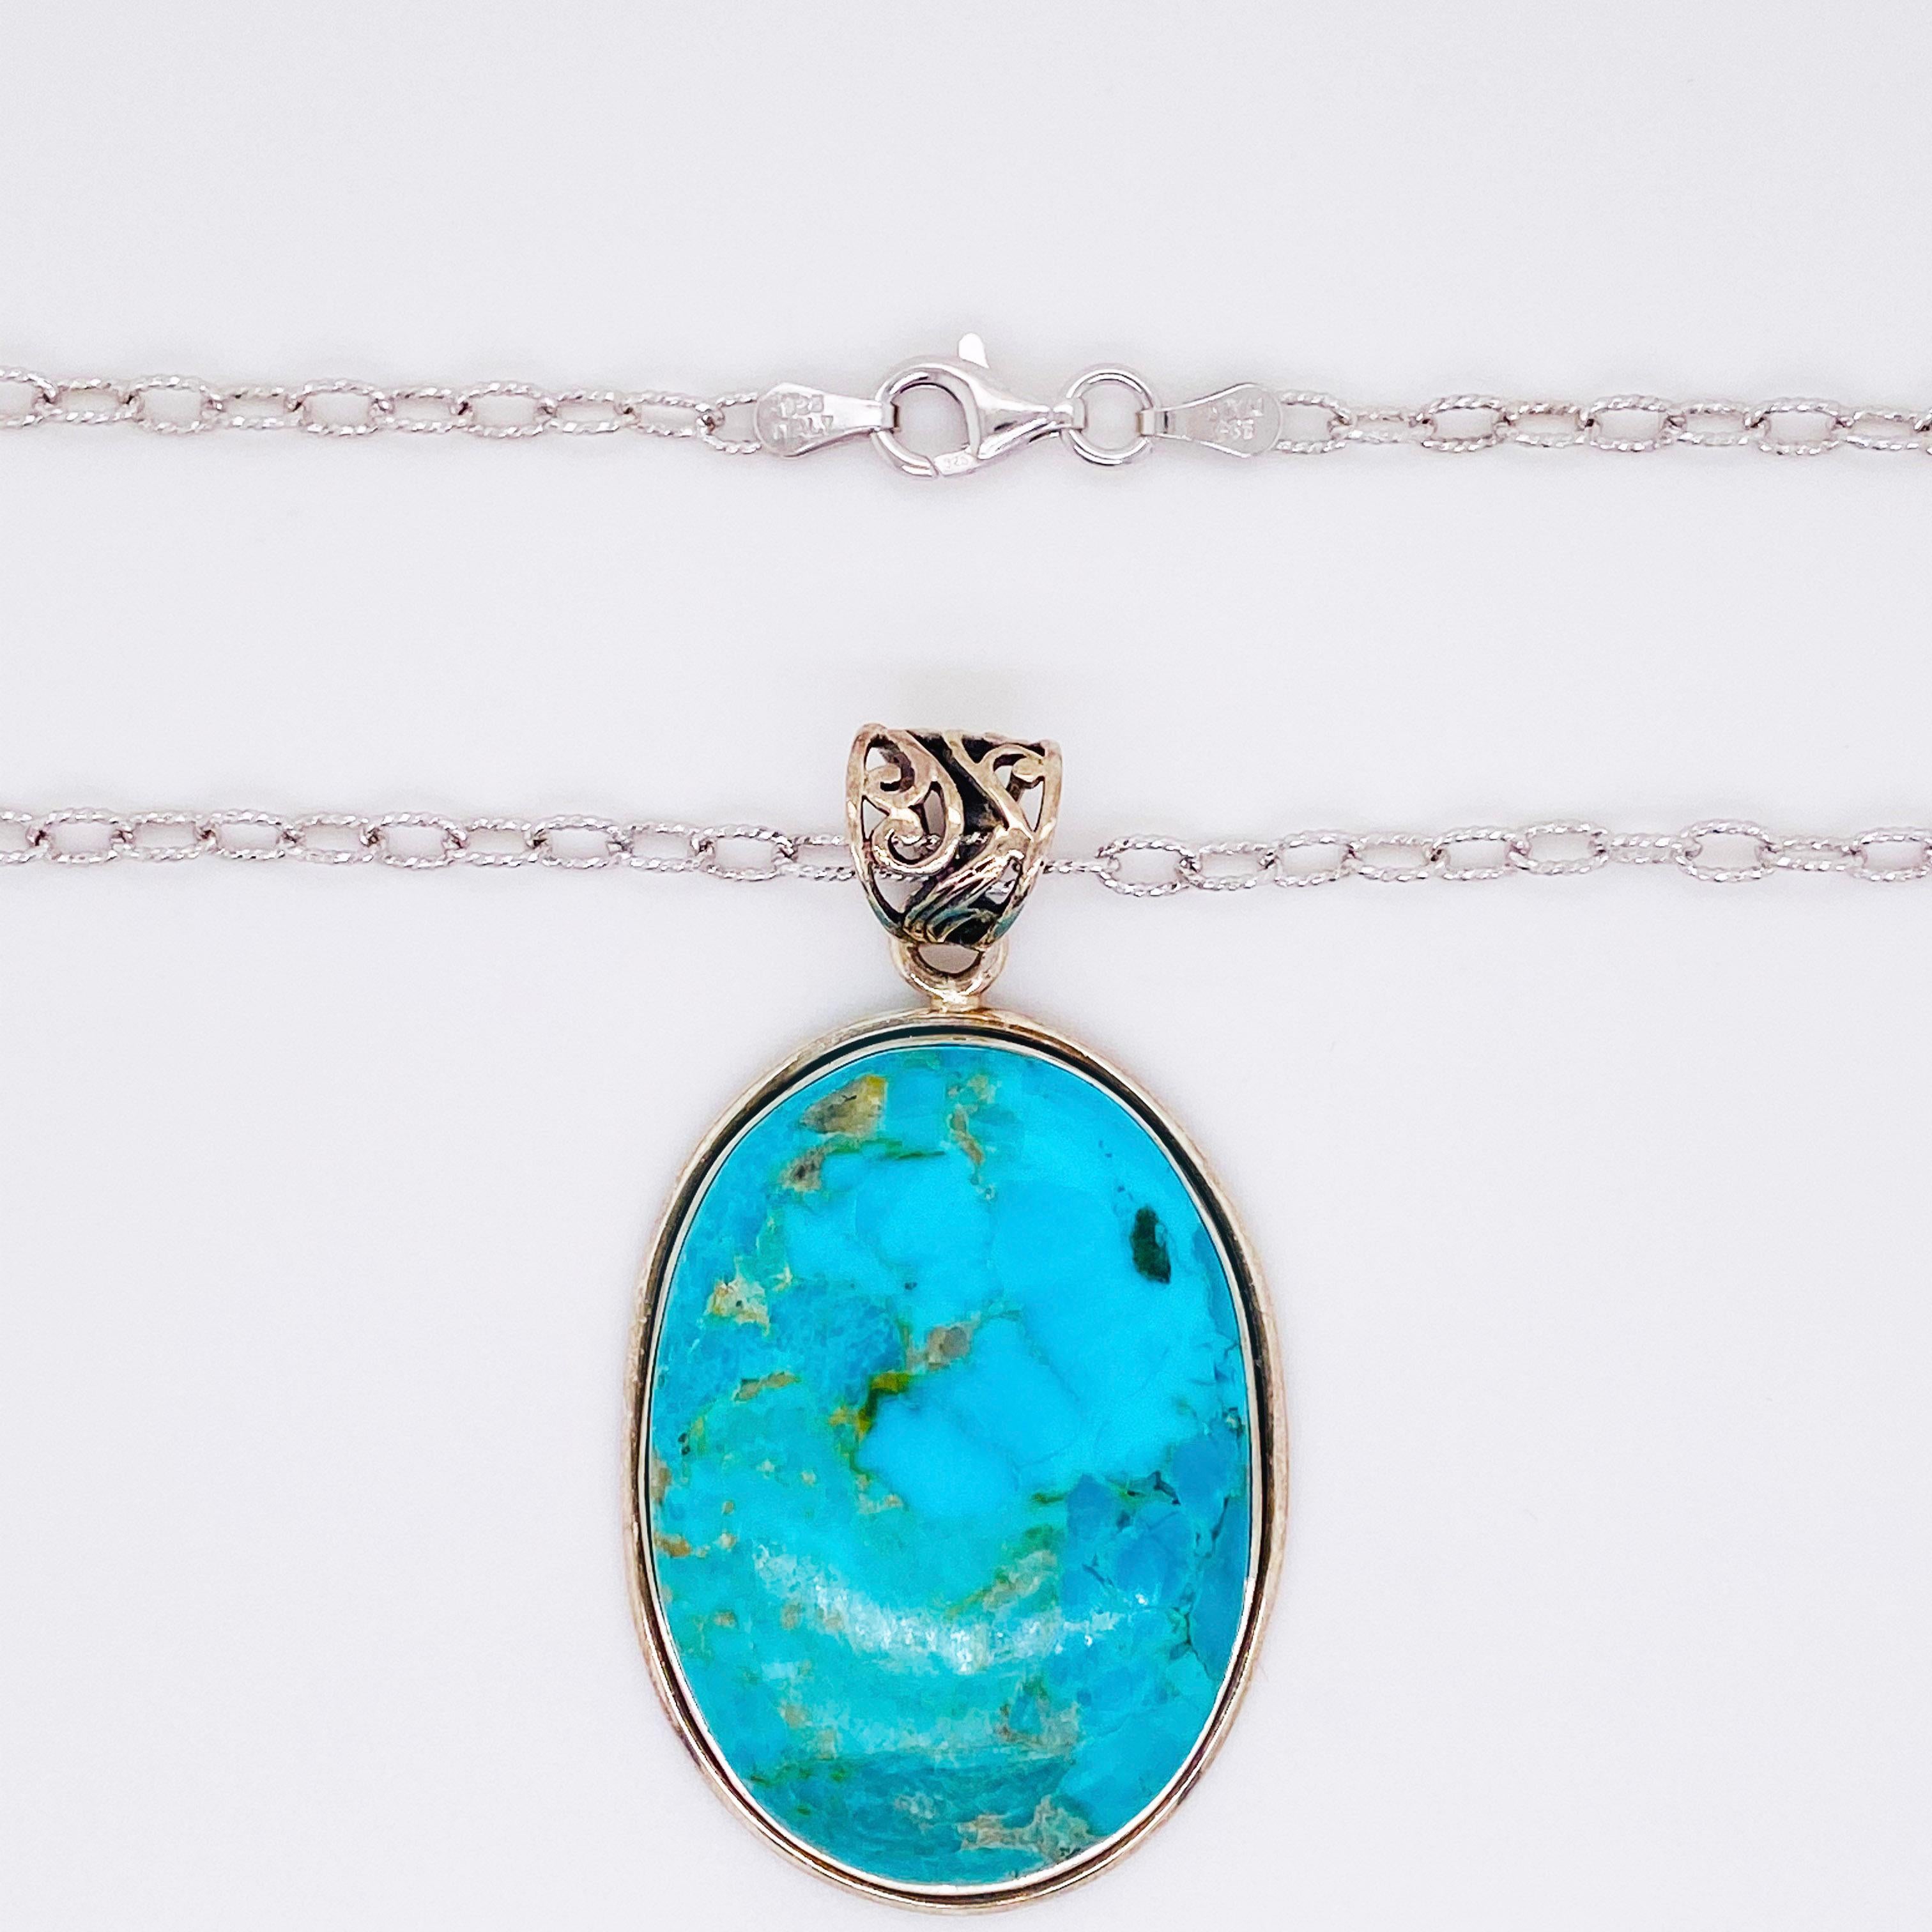 Focal Pendant Necklace Bastet Sterling Silver and Turquoise